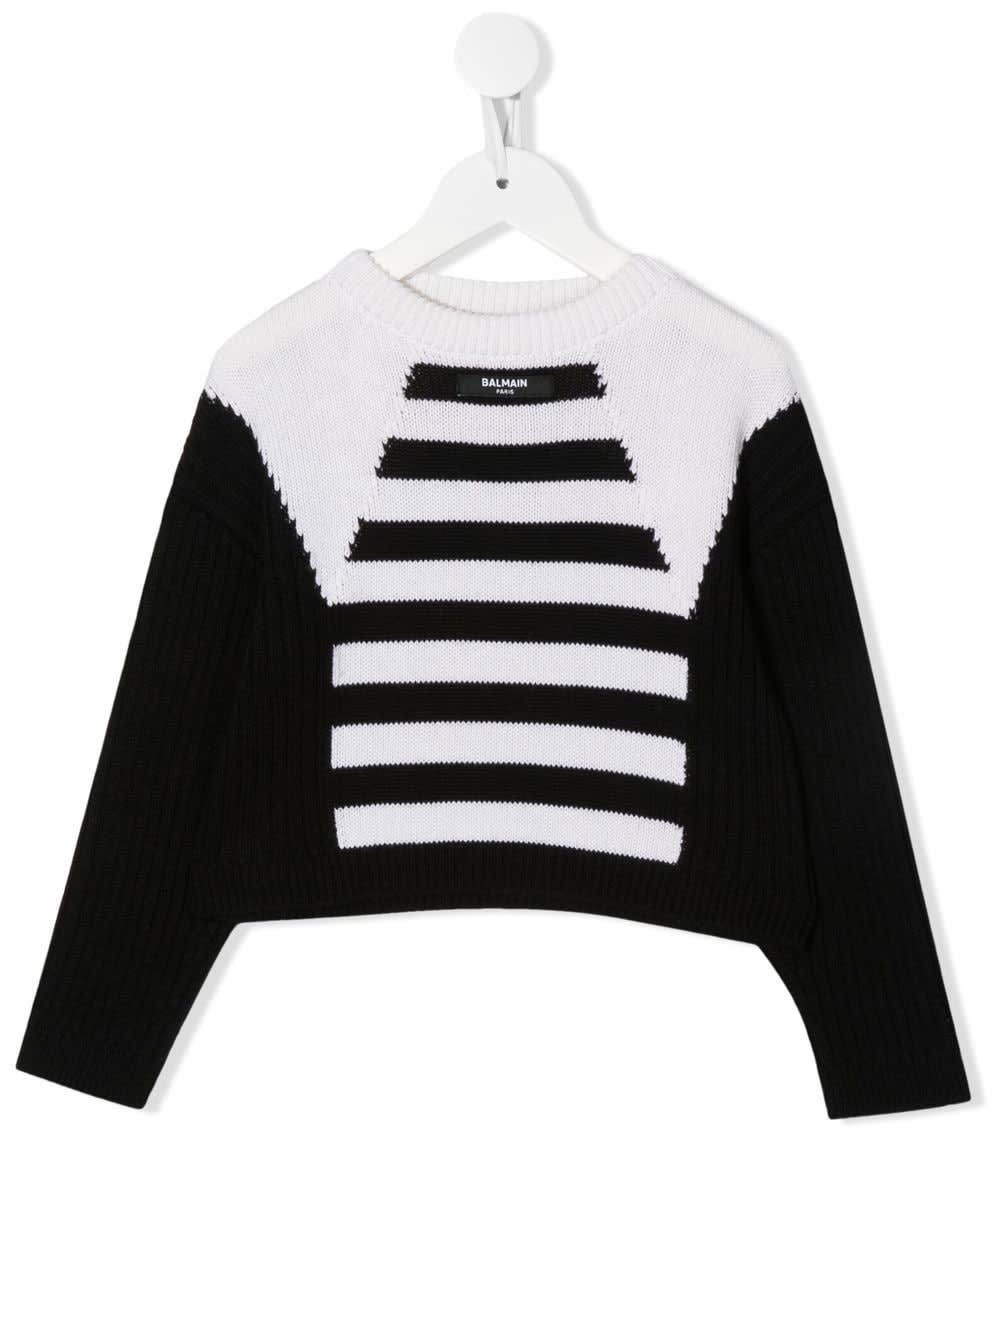 Balmain Kids Black And White Pullover With Color Block Design And Stripe Pattern